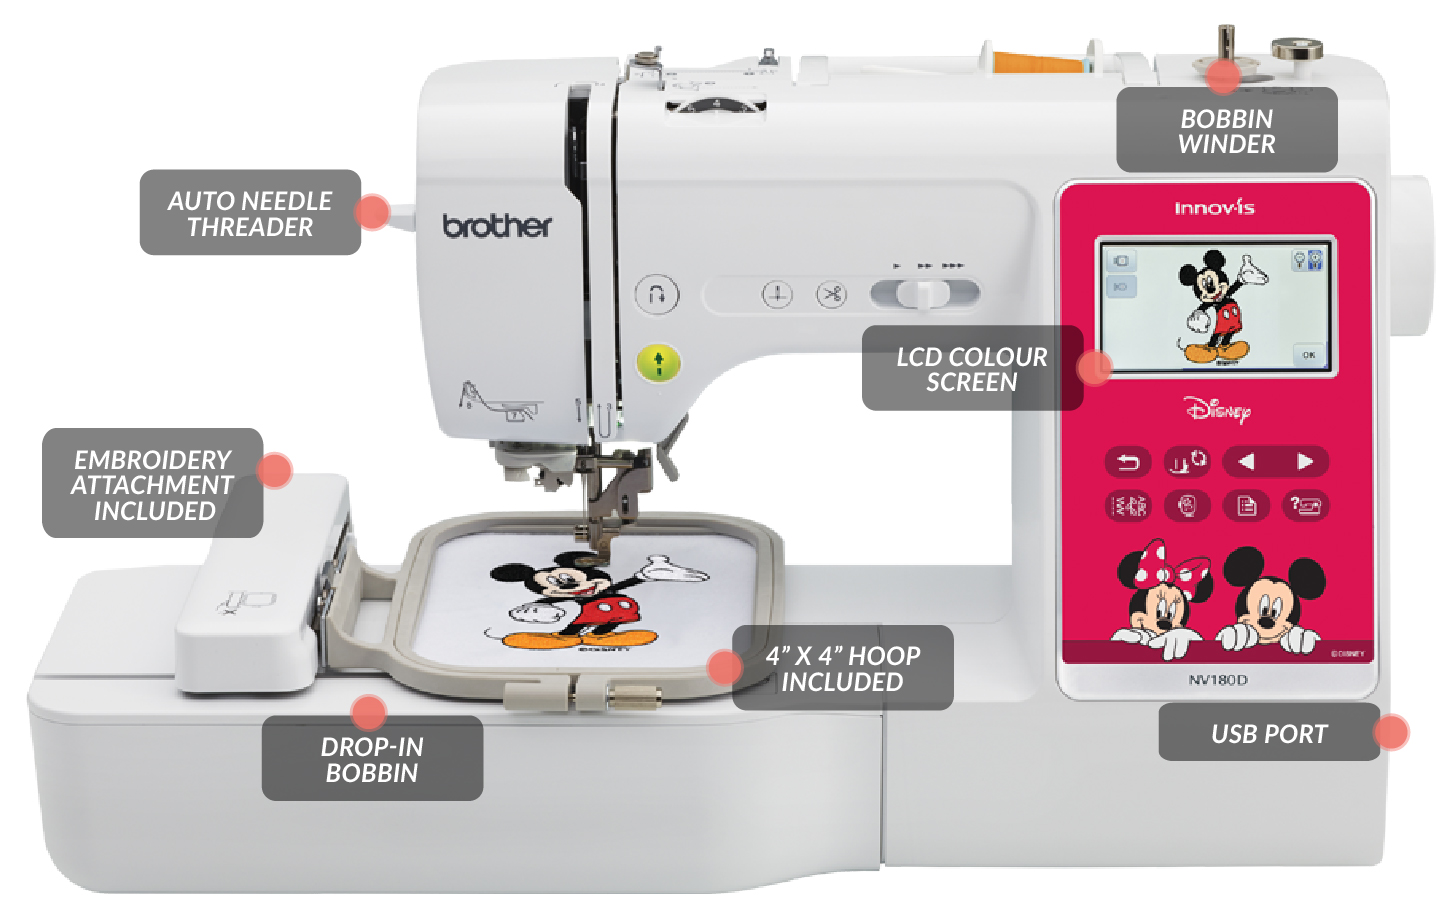 Echidna Sewing Brother NV180D sewing and embroidery machine